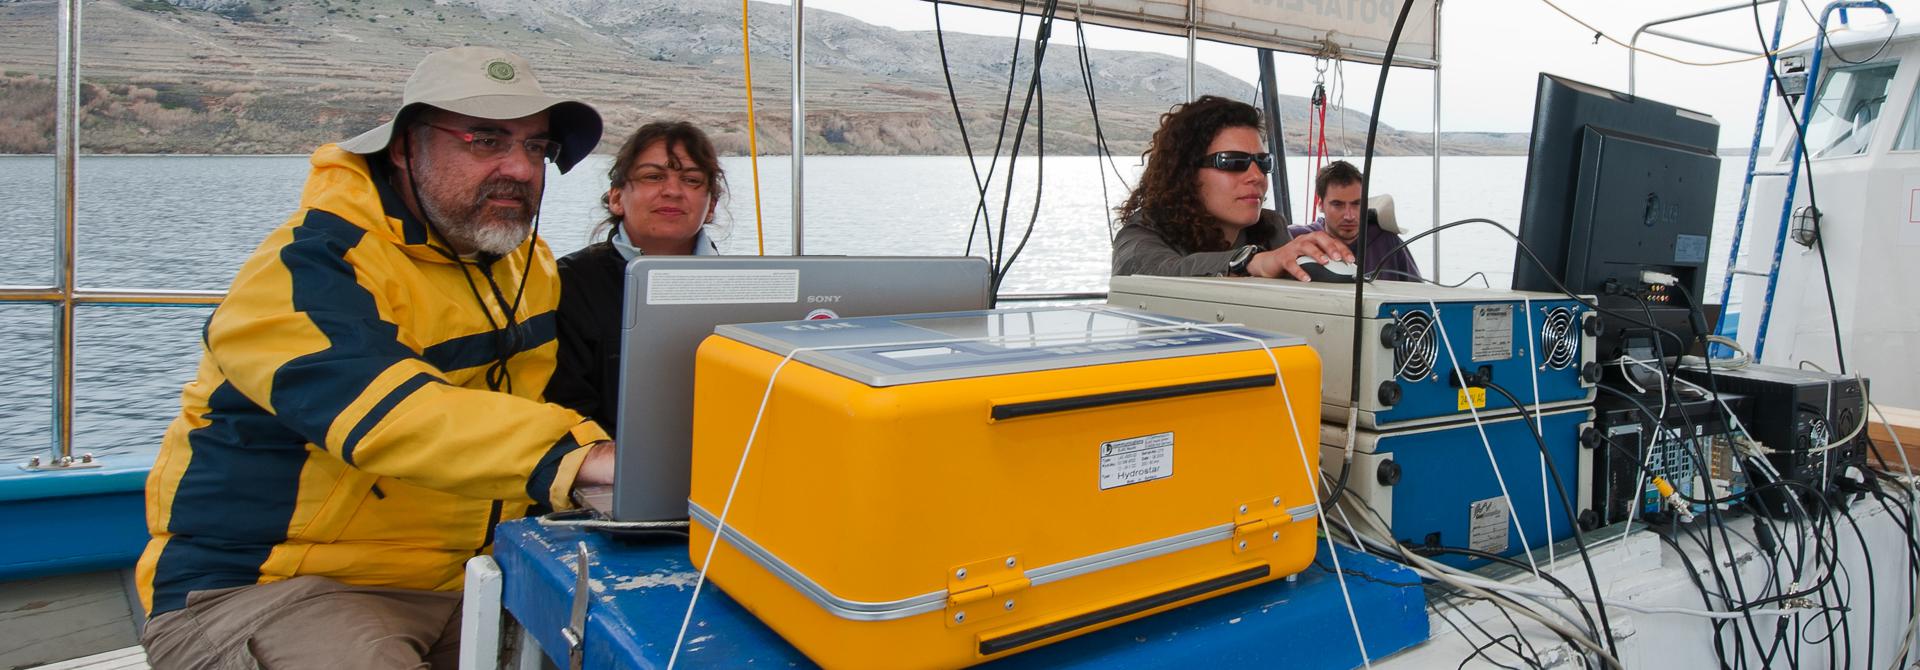 Gulf of Pag-The results of the geophysical survey allow the reconstruction of the process of formation of the Gulf of Pag, and reveal some positions of potential archaeological interest. (Photo: Giulia Boetto)